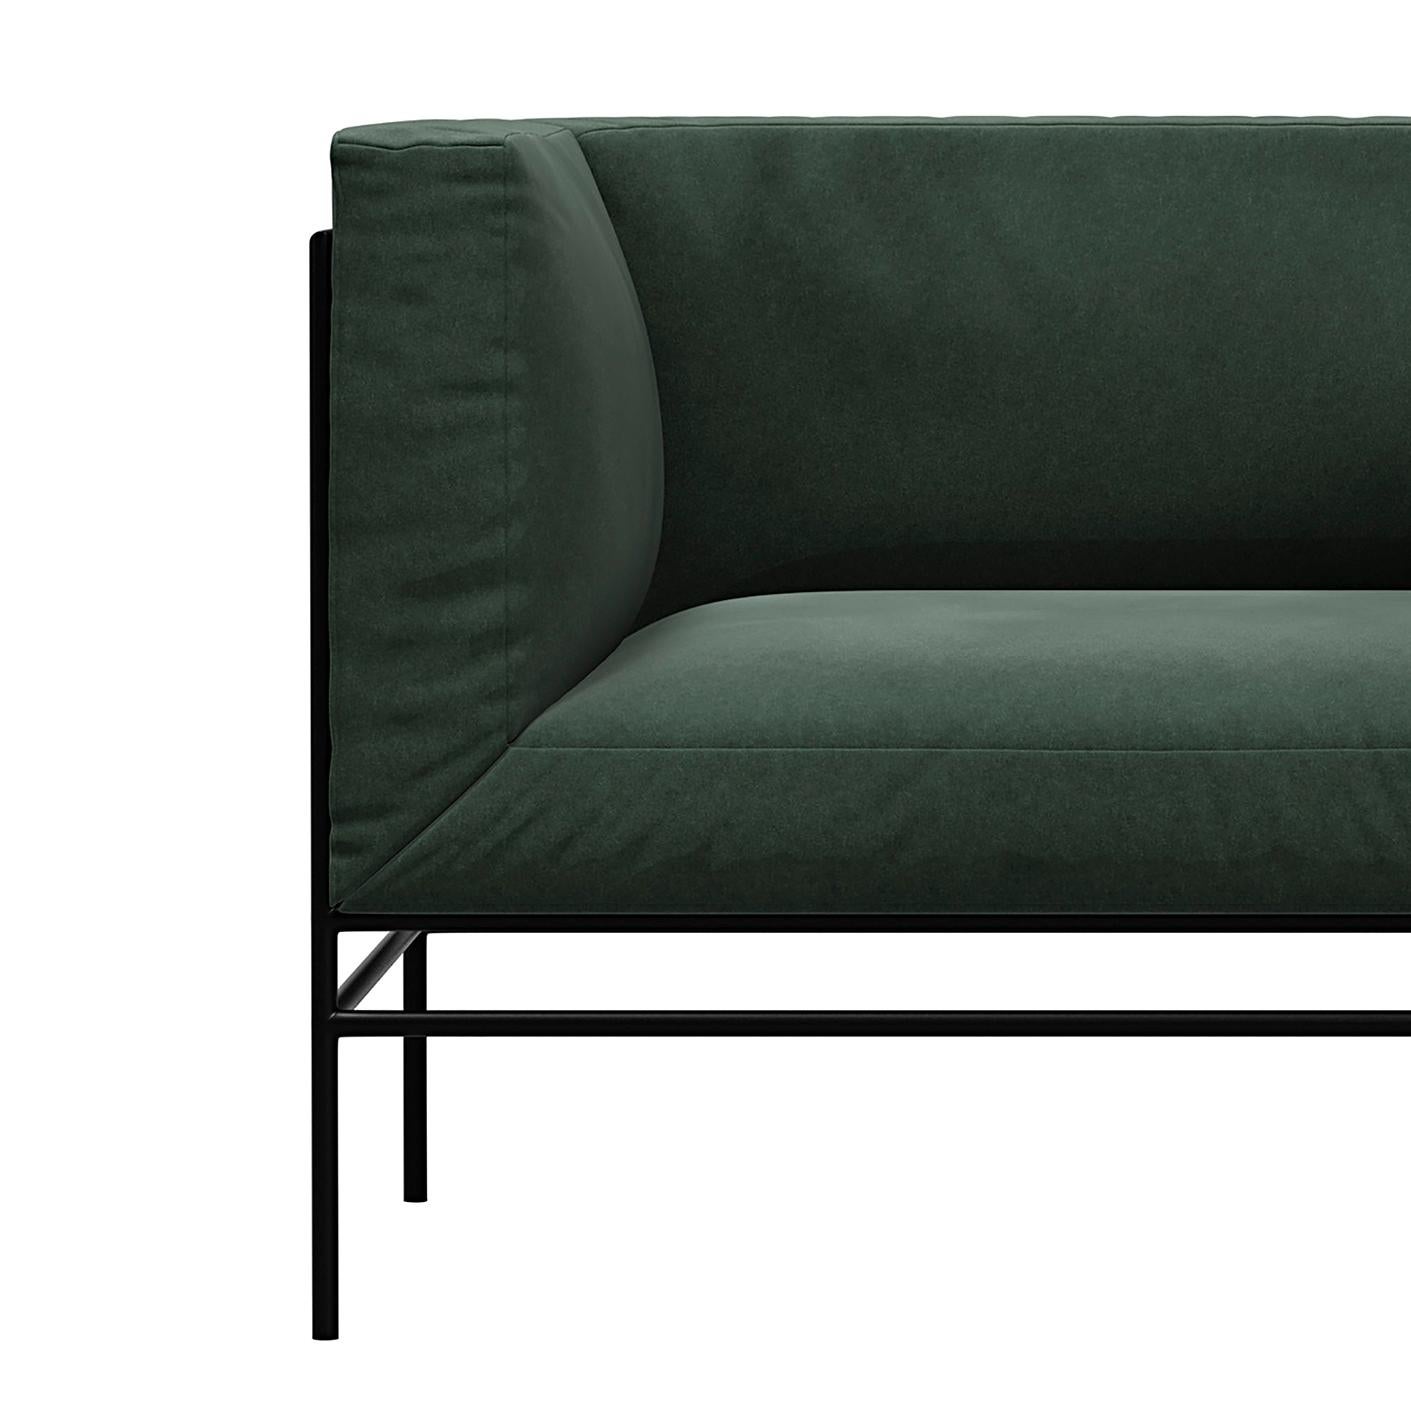 'Middleweight' armchair designed by Michael Anastassiades for Karakter

Middleweight is Michael Anastassiades’ very first upholstered piece of furniture. The piece captures the best of two worlds, the Italian super lounge sofa on one side and the